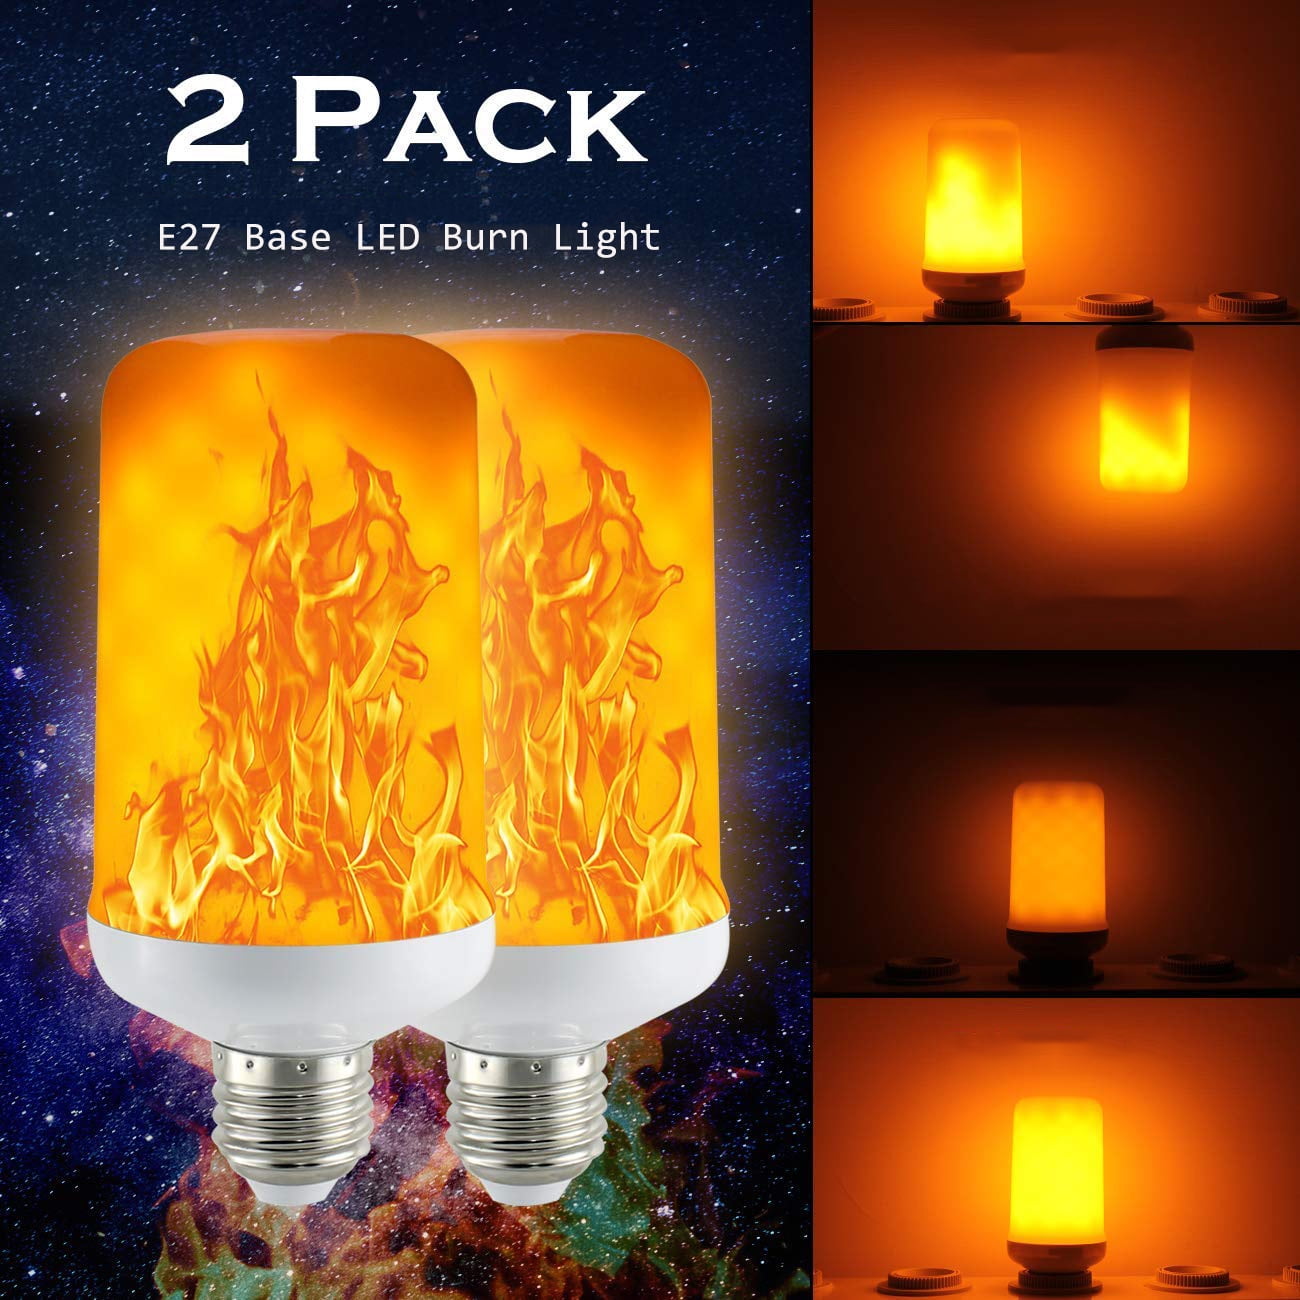 3 Pack E27 LED Flicker Flame Fire Effect Simulated Nature Light Bulb Decor Lamp 